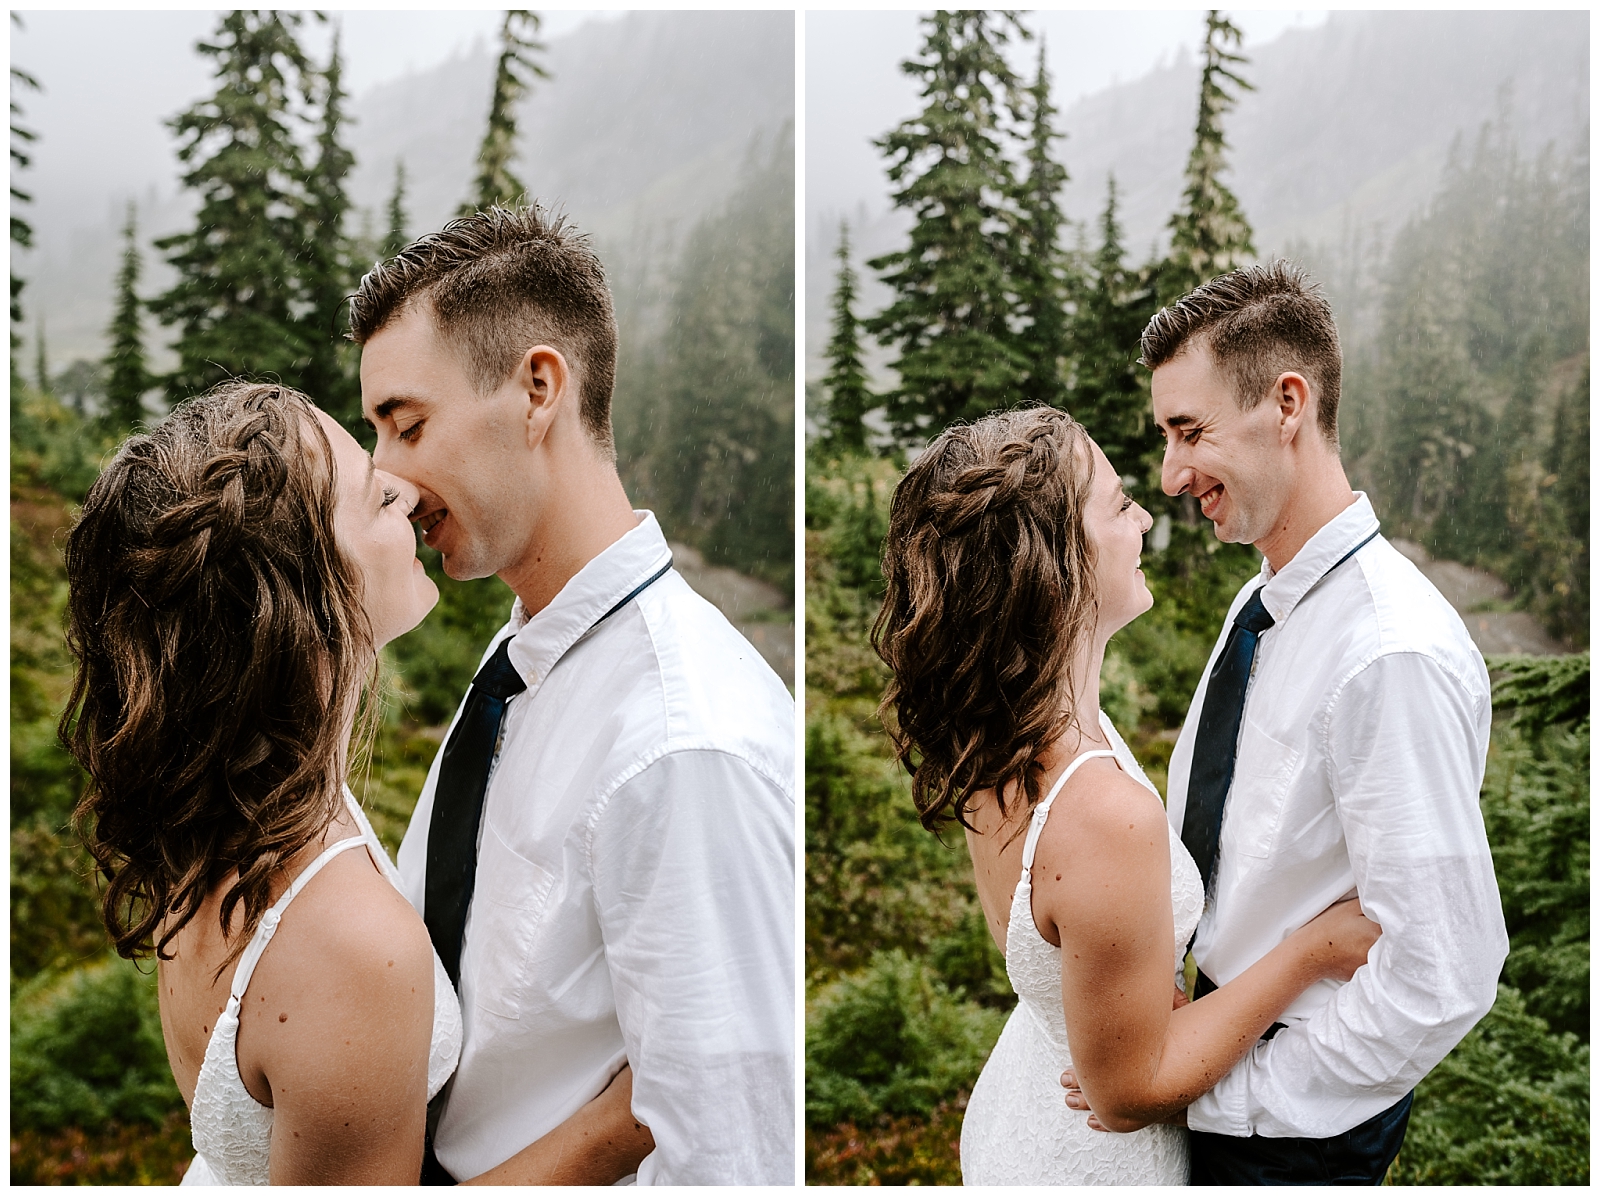 sweet couple eloping at Mount Baker in the North Cascades